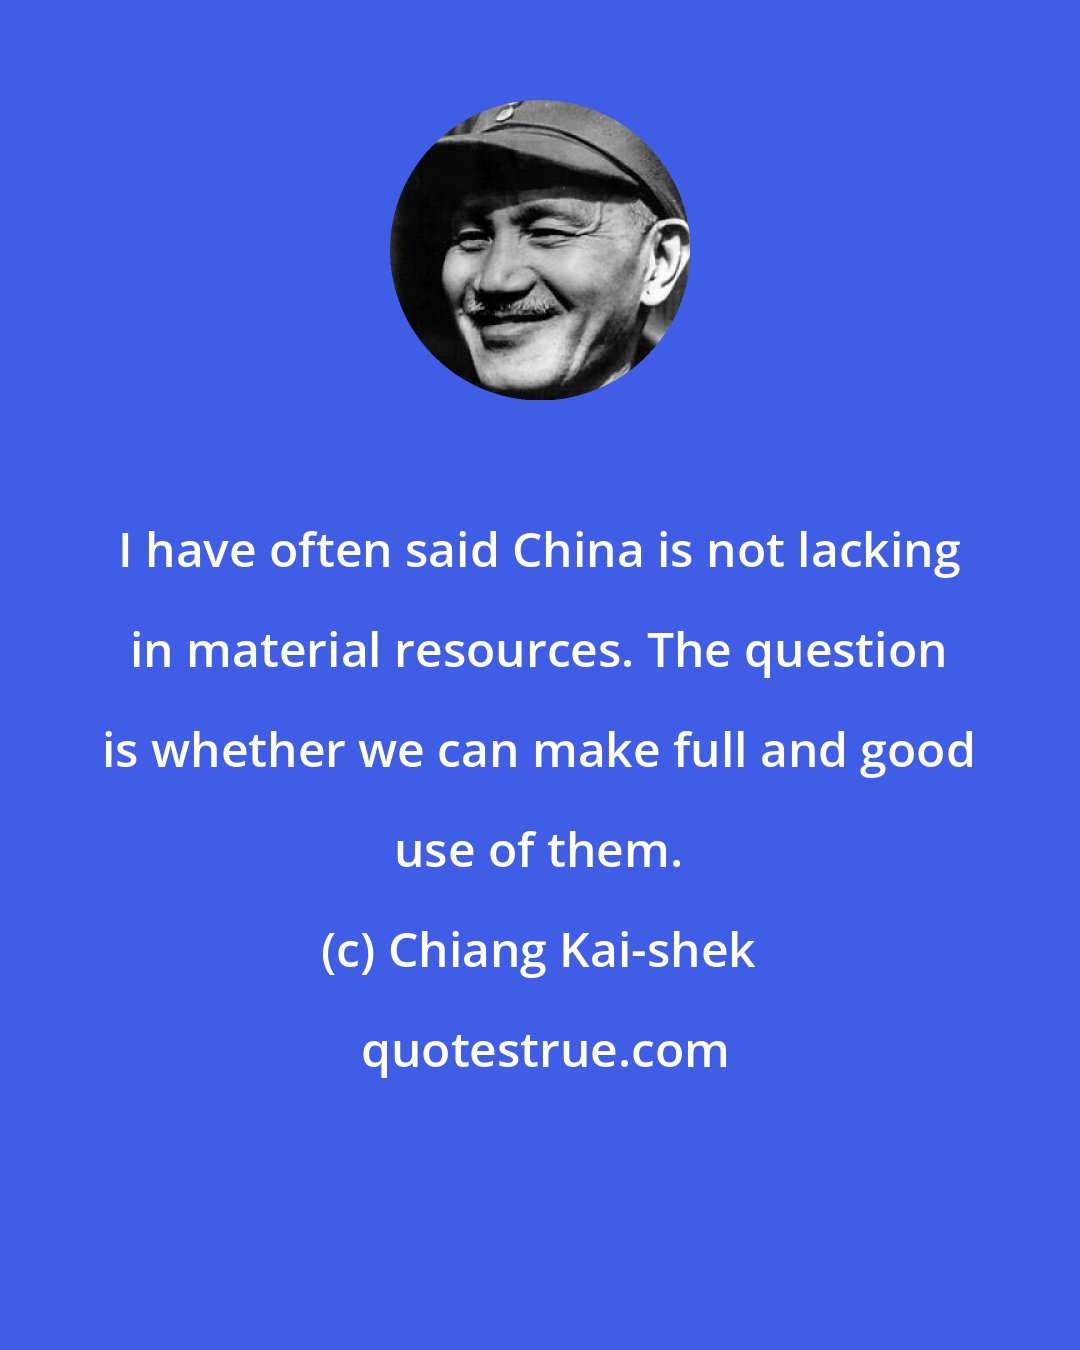 Chiang Kai-shek: I have often said China is not lacking in material resources. The question is whether we can make full and good use of them.